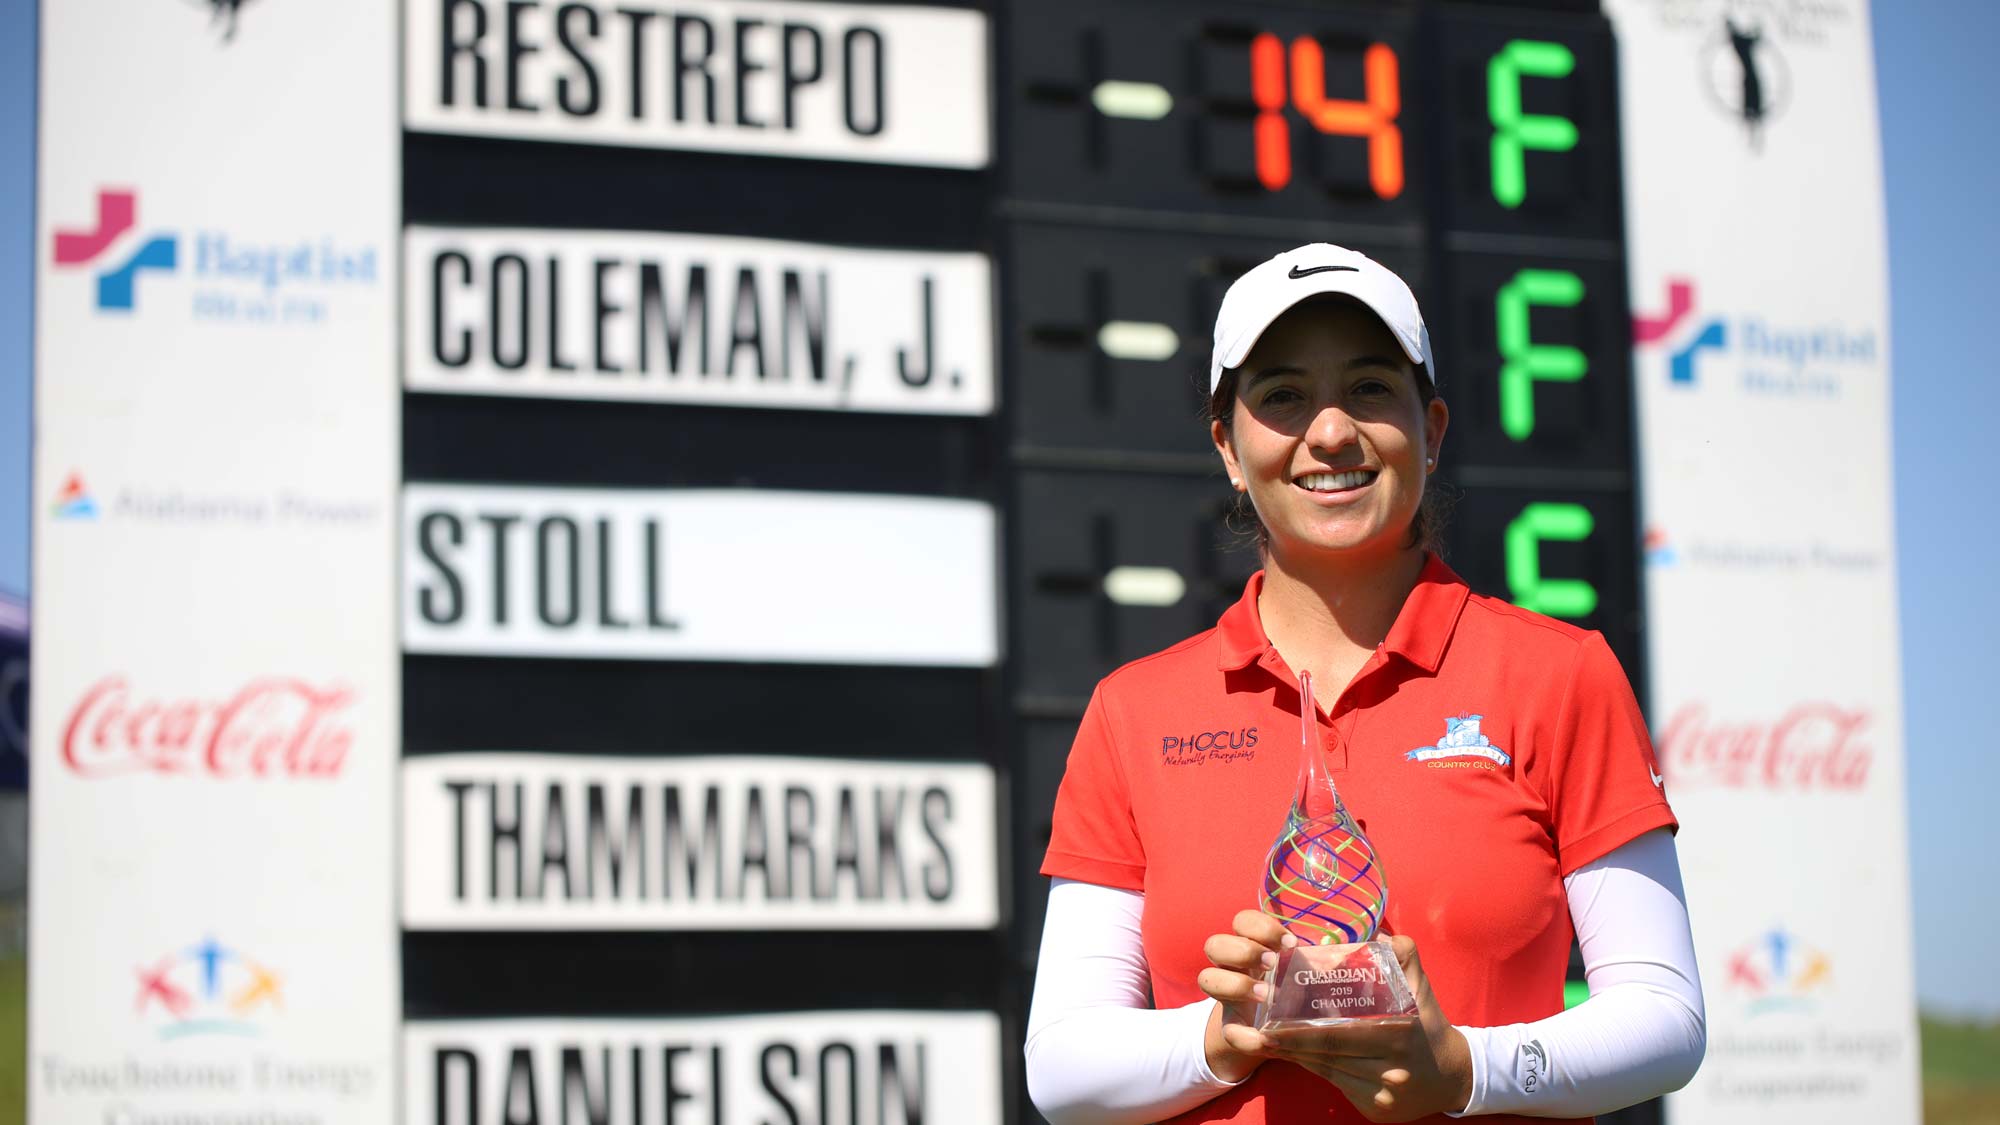 Laura Restrepo with trophy at leaderboard 